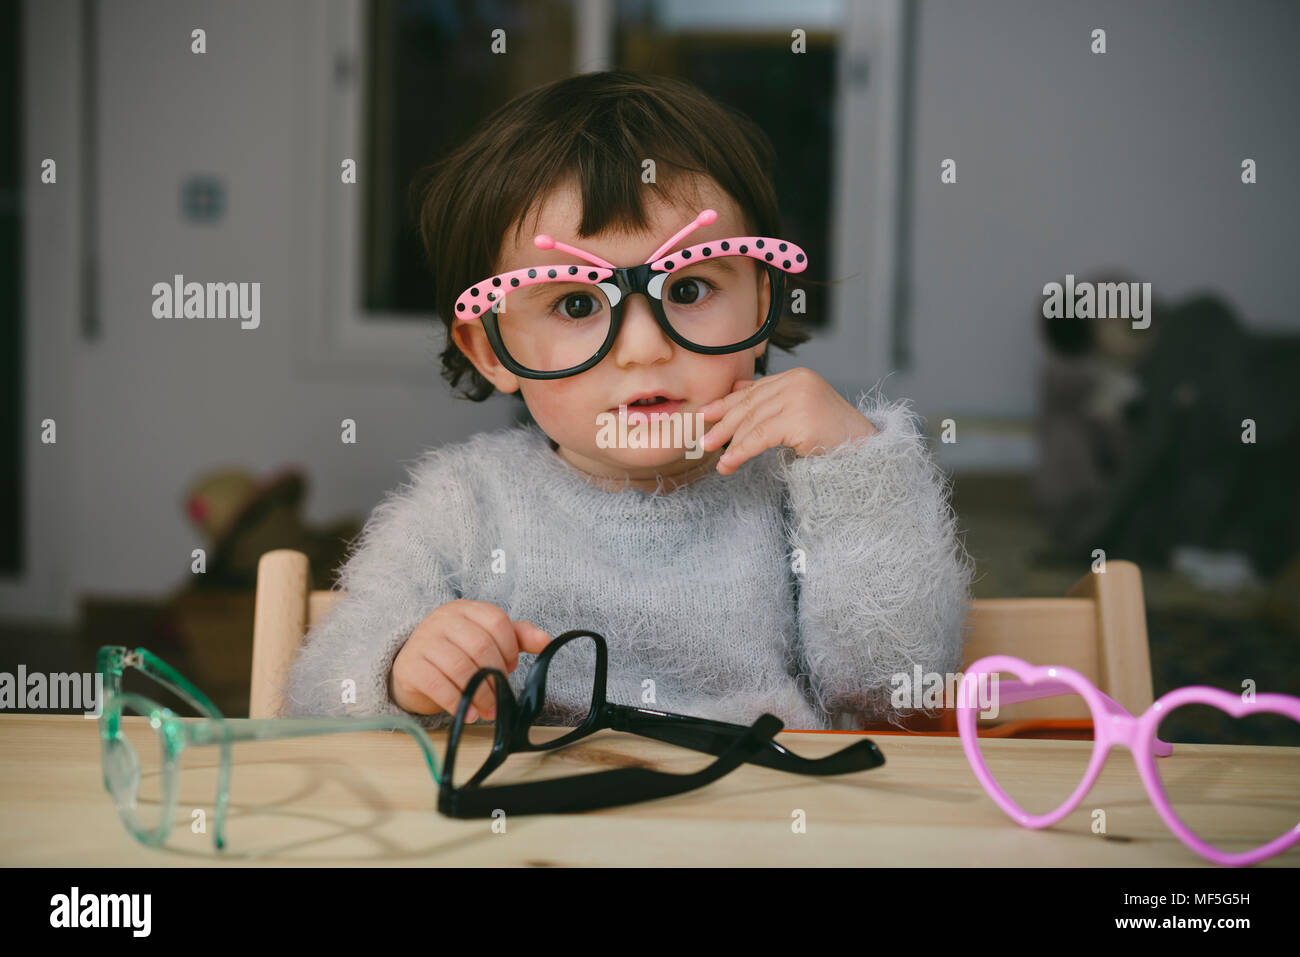 Portrait of baby girl playing with toy glasses Stock Photo